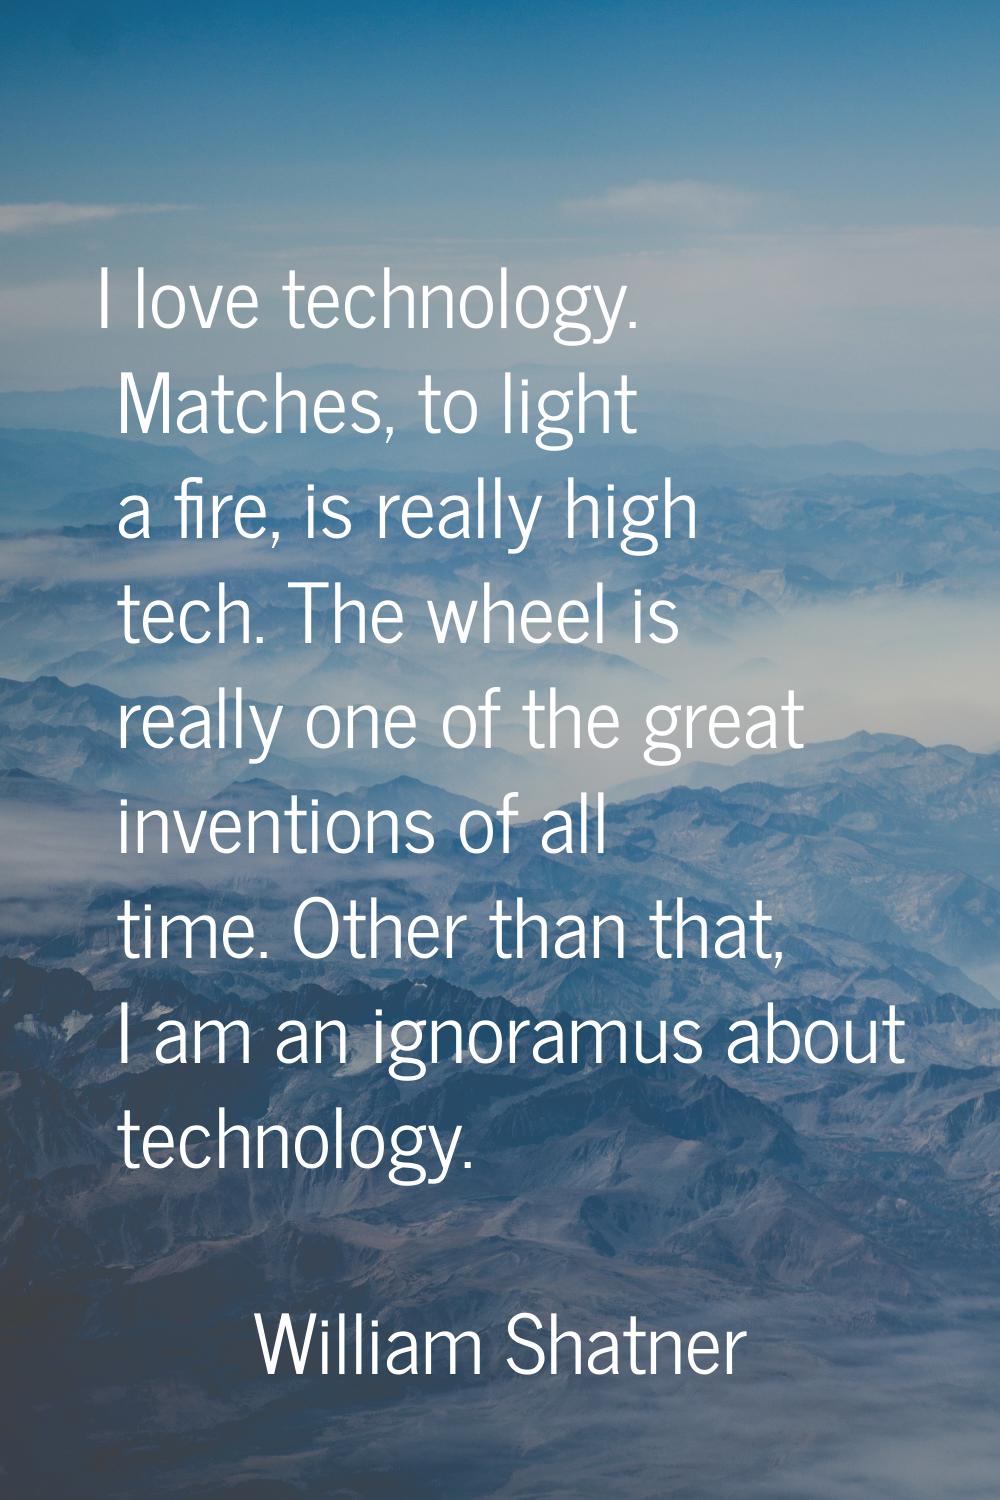 I love technology. Matches, to light a fire, is really high tech. The wheel is really one of the gr